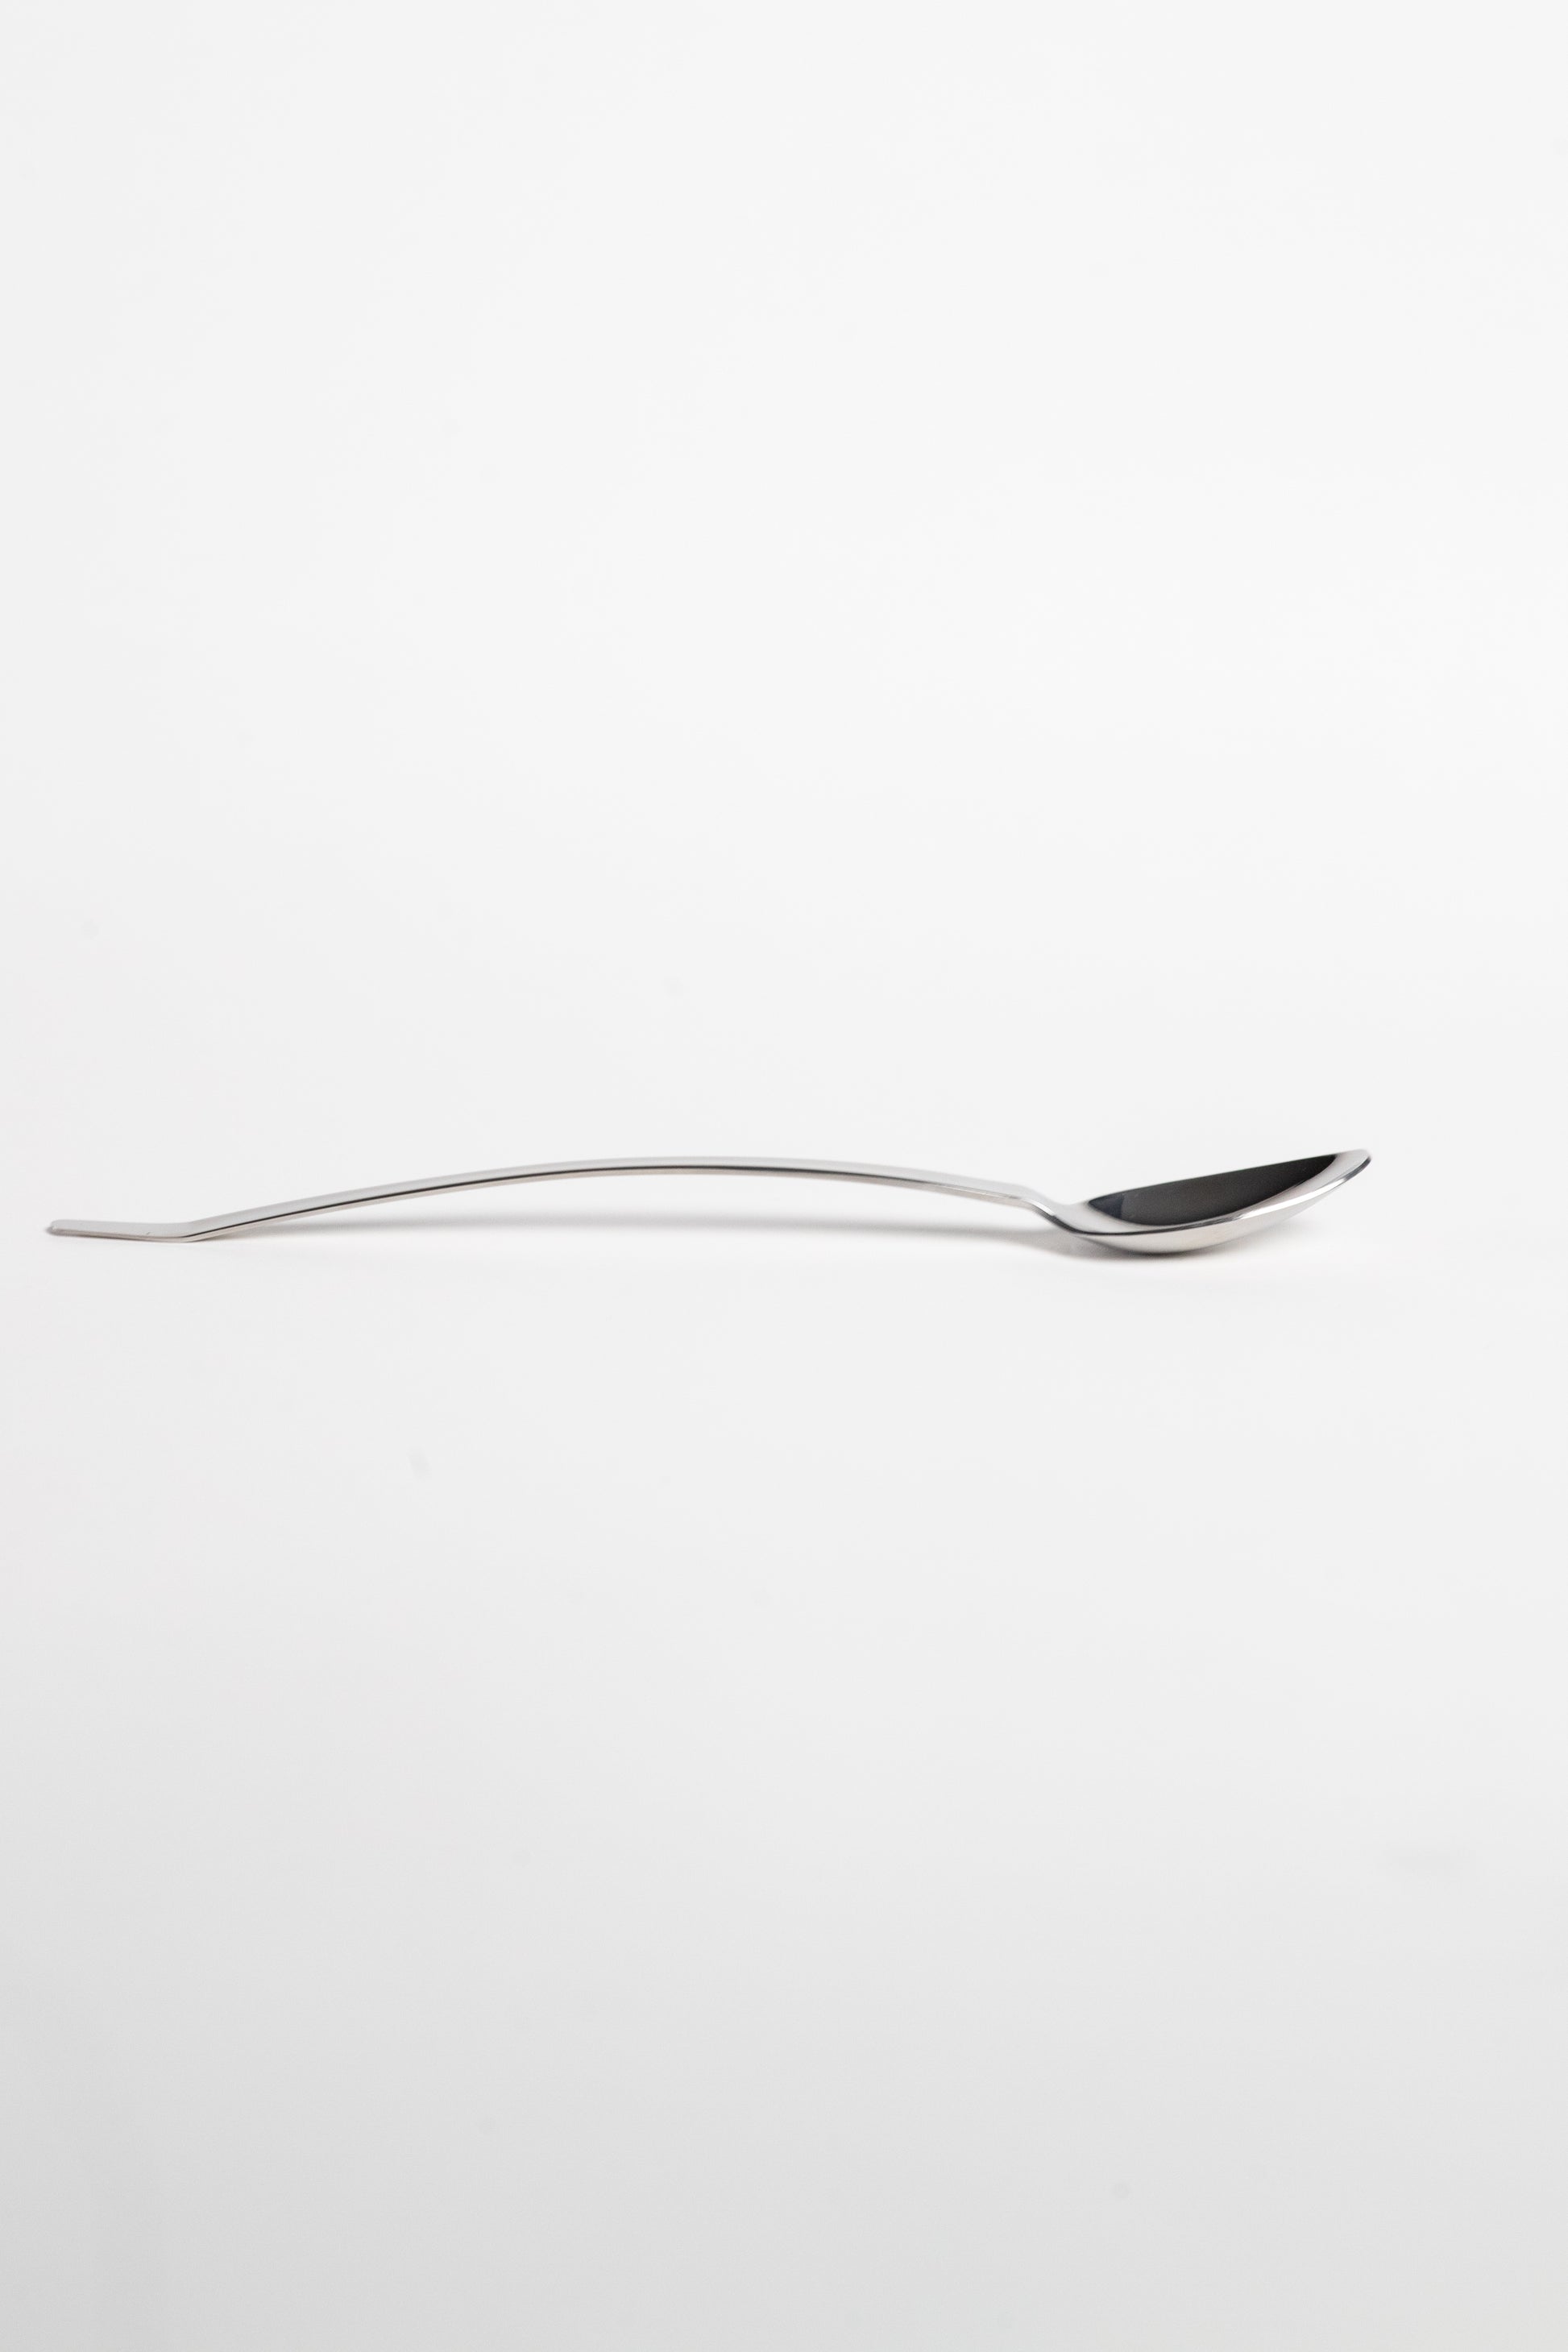 Robert Welch | Large Quenelle Spoon